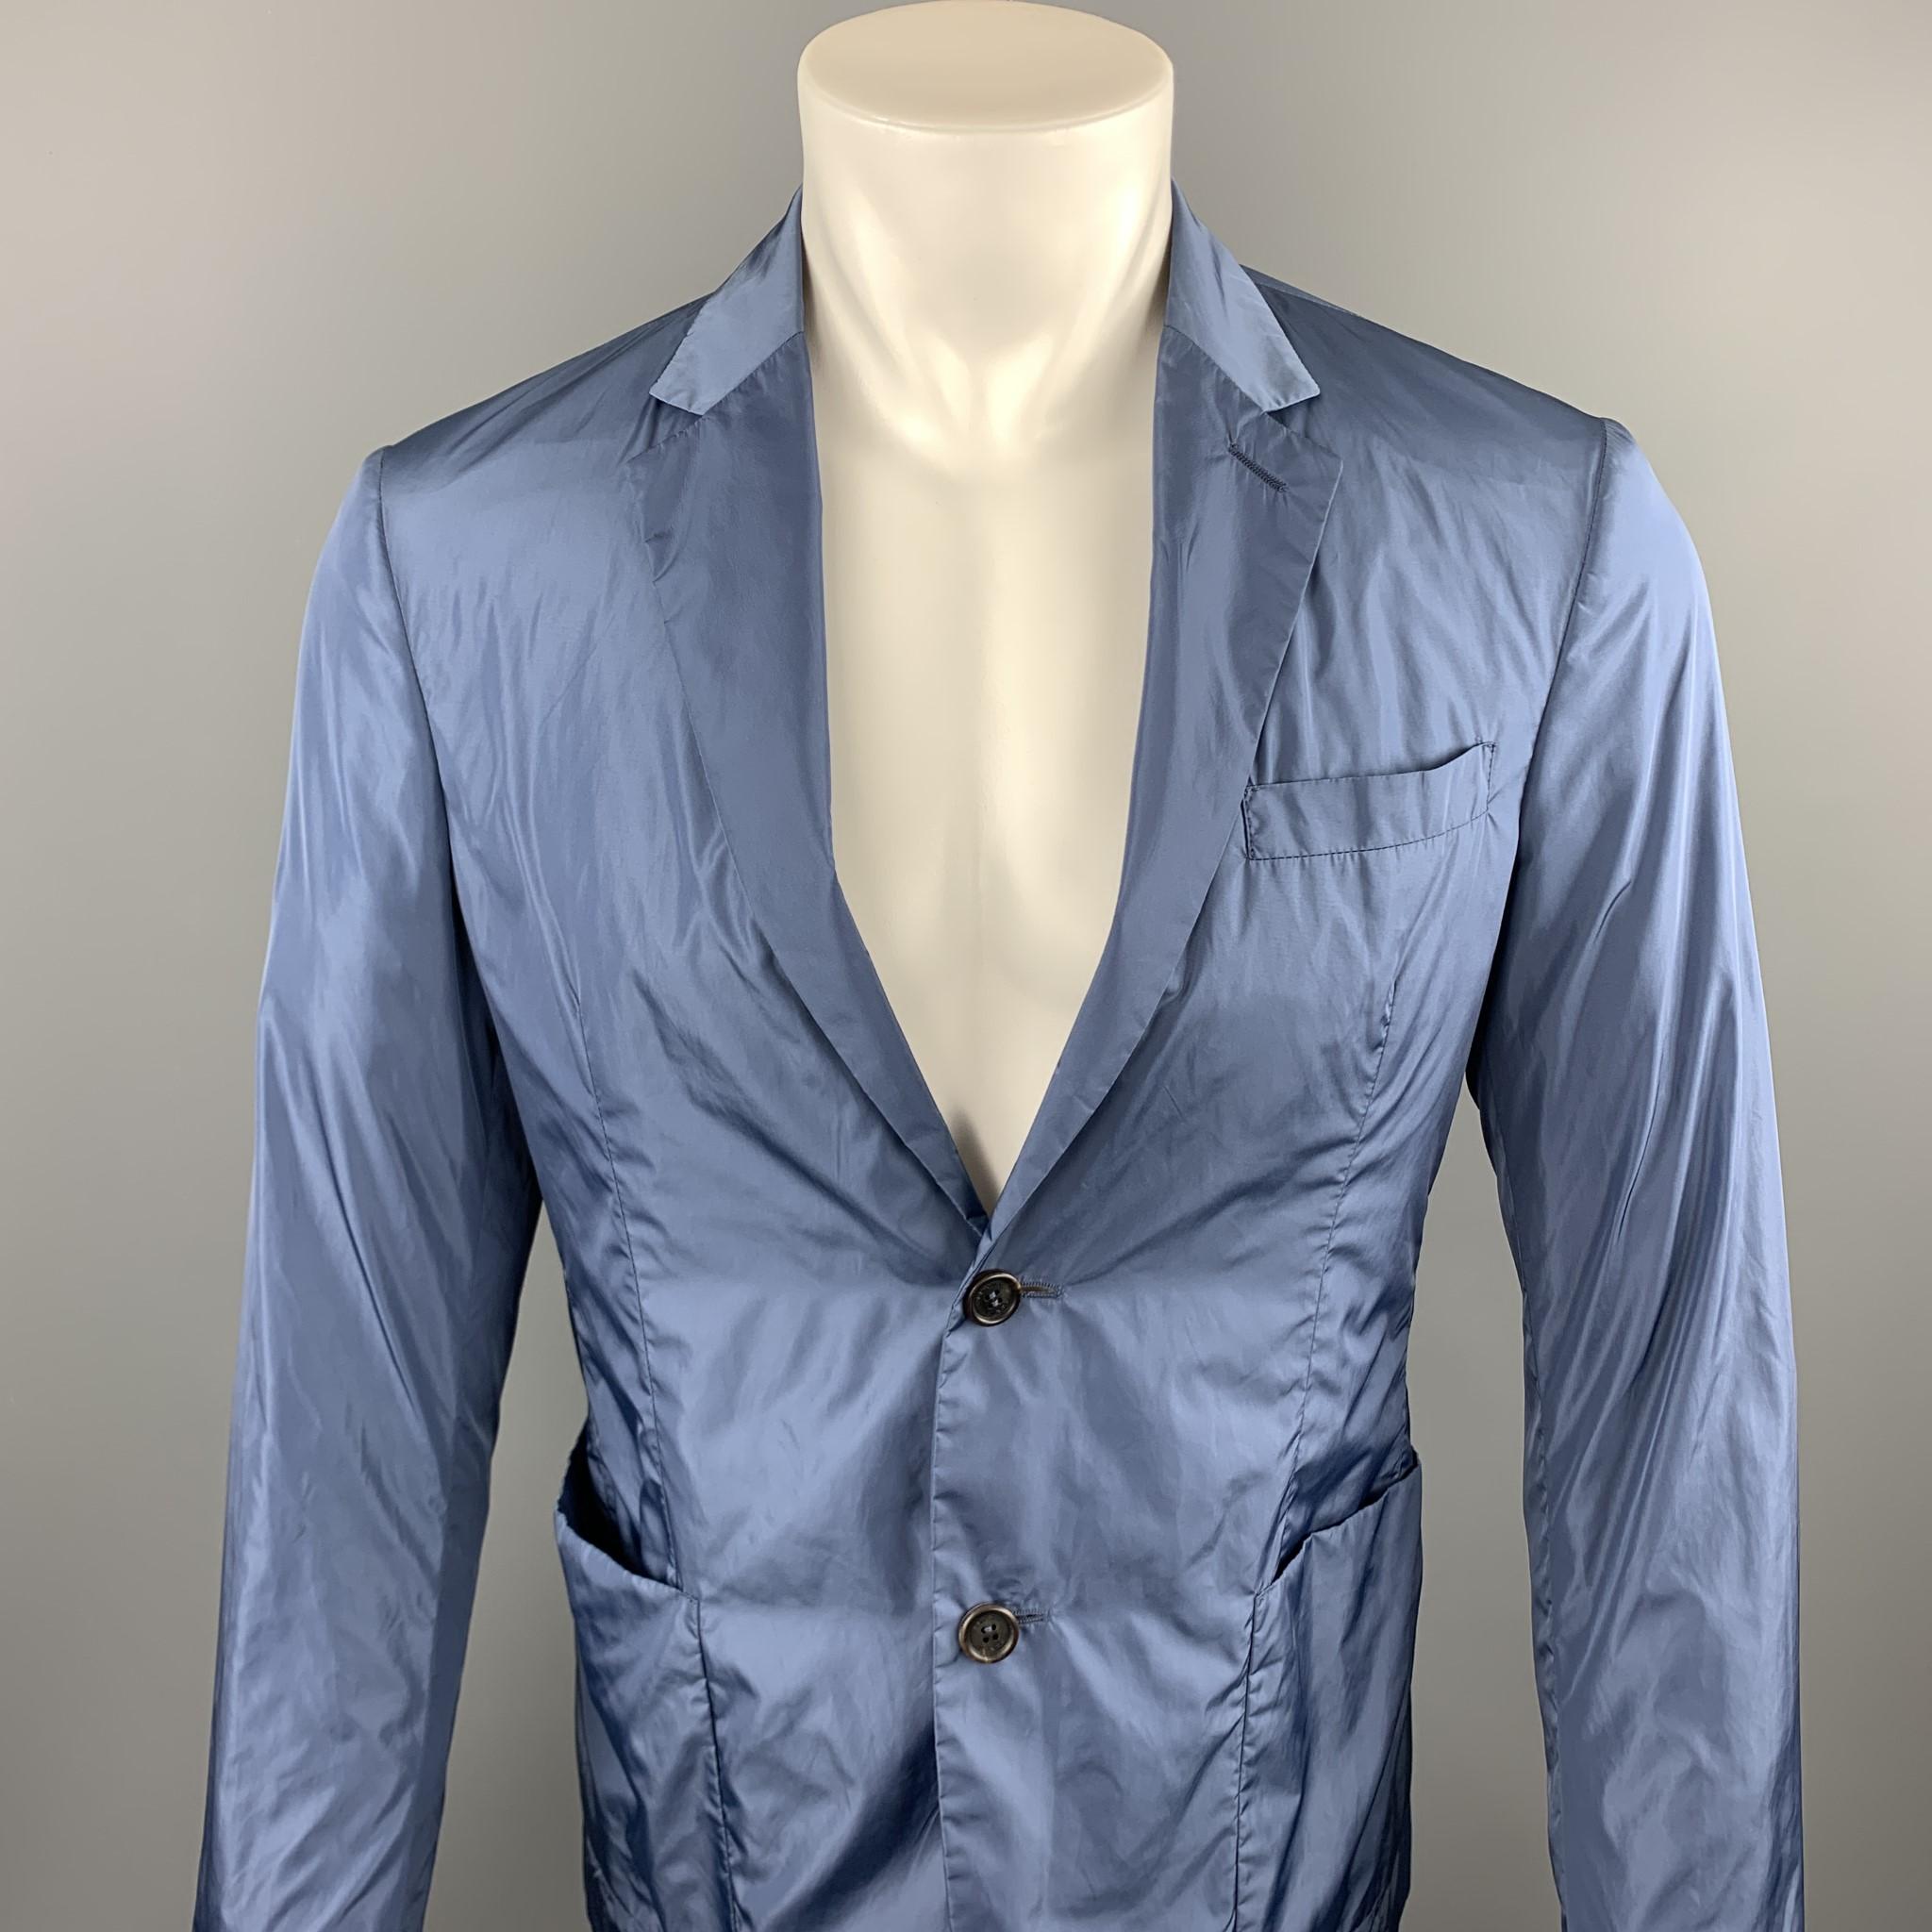 PRADA sport coat comes in a steel blue polyester featuring a notch lapel, patch pockets, and a two button closure. 

Excellent Pre-Owned Condition.
Marked: TG 48

Measurements:

Shoulder: 16.5 in. 
Chest: 38 in.
Sleeve: 26 in.
Length: 28 in.  